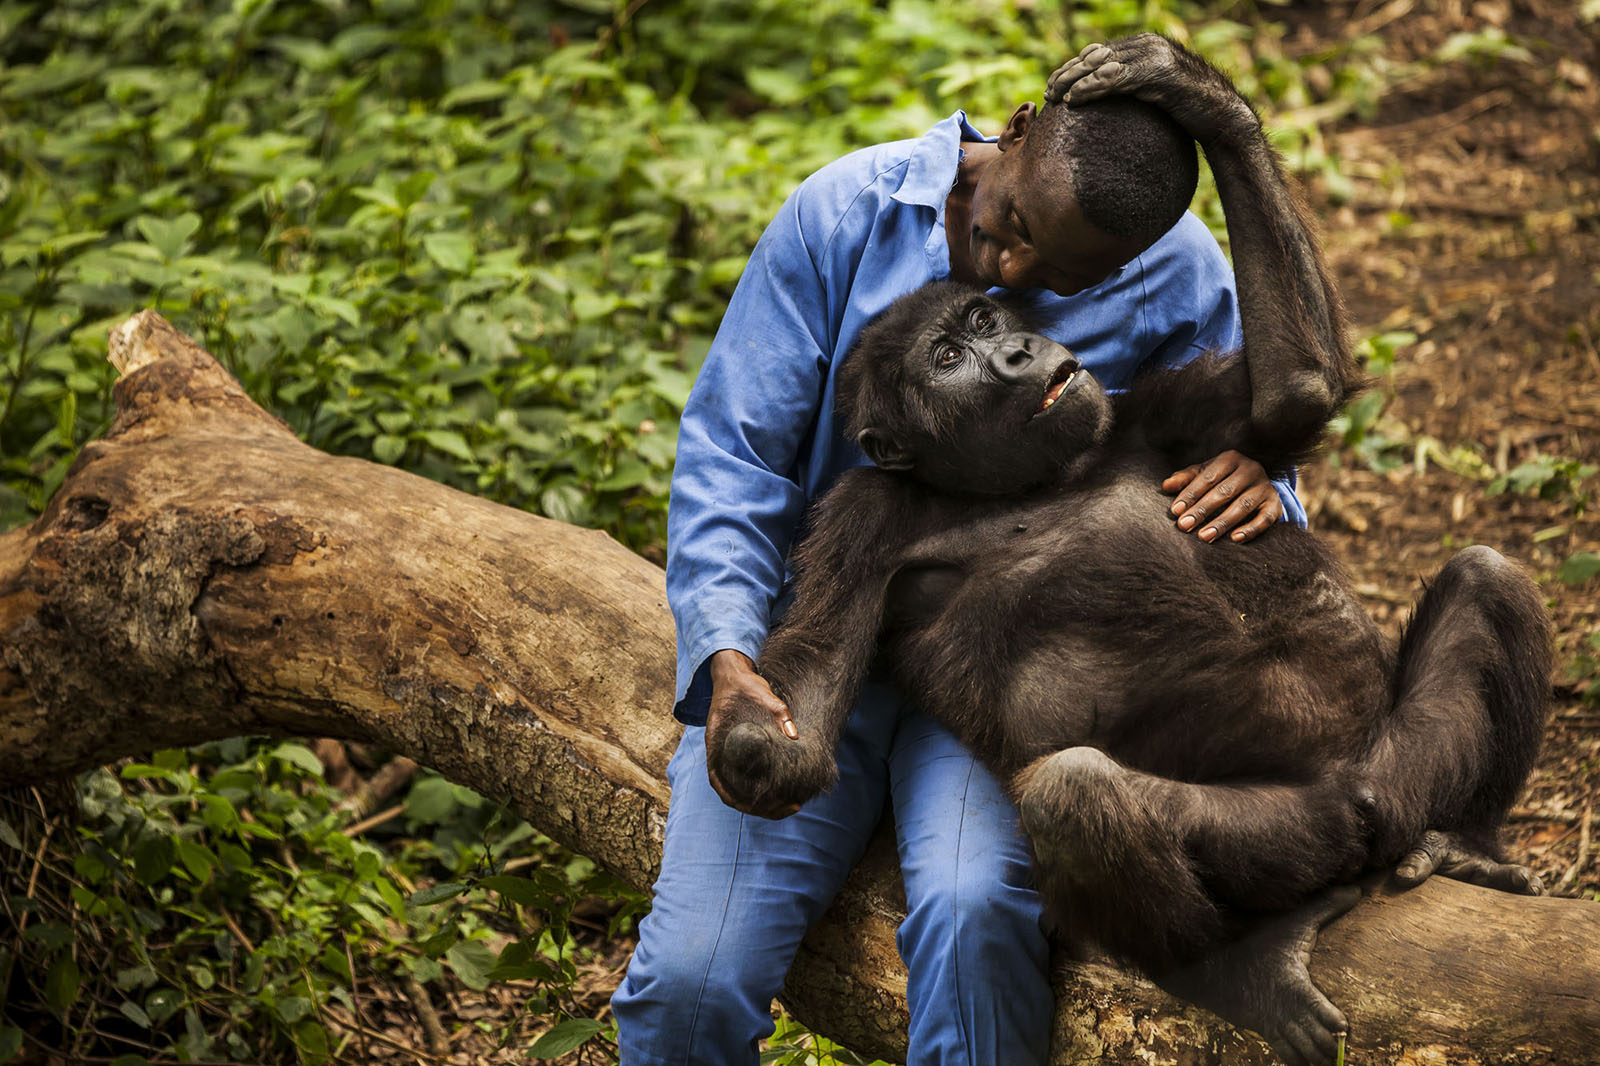 8 days mountaineering Congo safari with gorillas in Virunga national park and Volcanoes national park